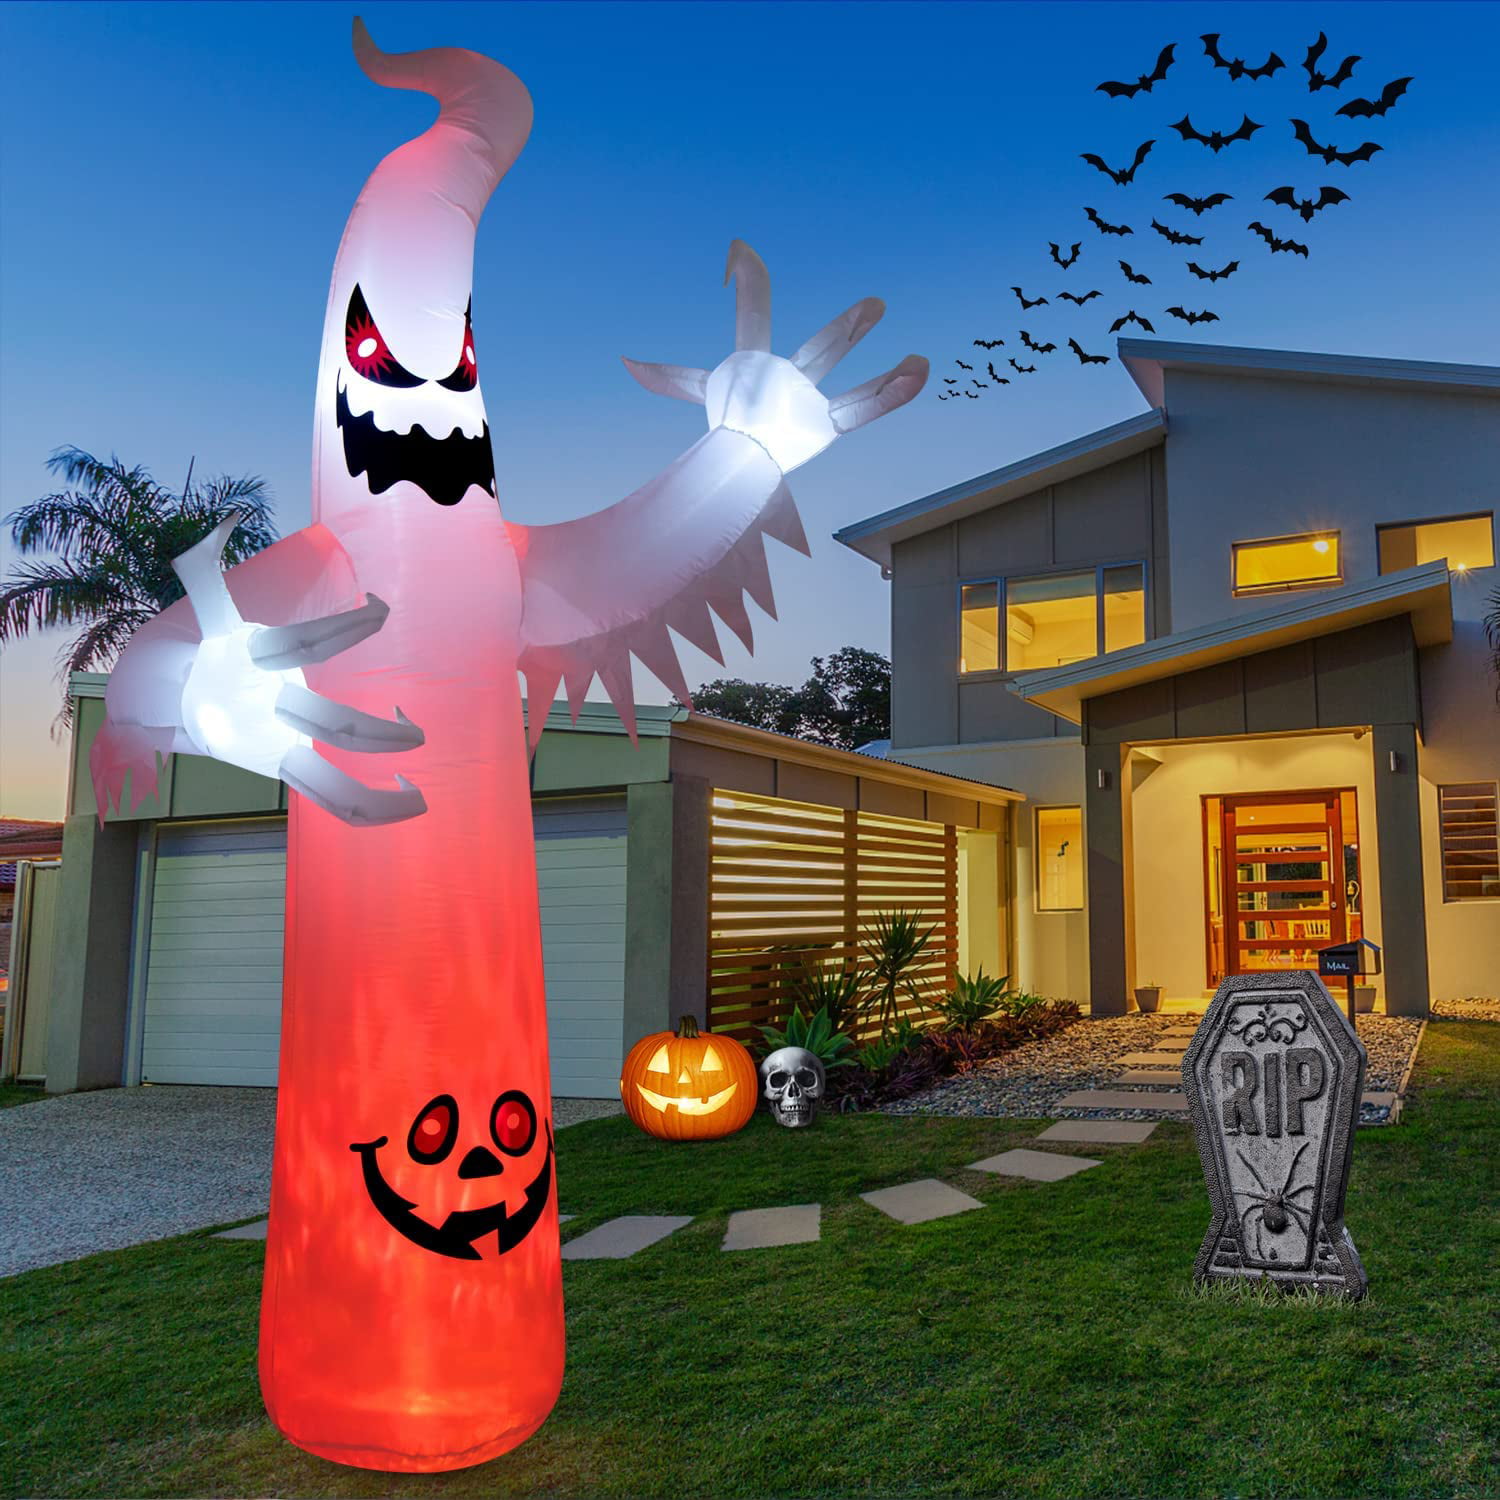 Sizonjoy 9 Ft Giant Halloween Inflatable Ghost,Blow Up Halloween Decorations Built-in LED Lights for Indoor/Outdoor Yard Garden Includes Stakes 